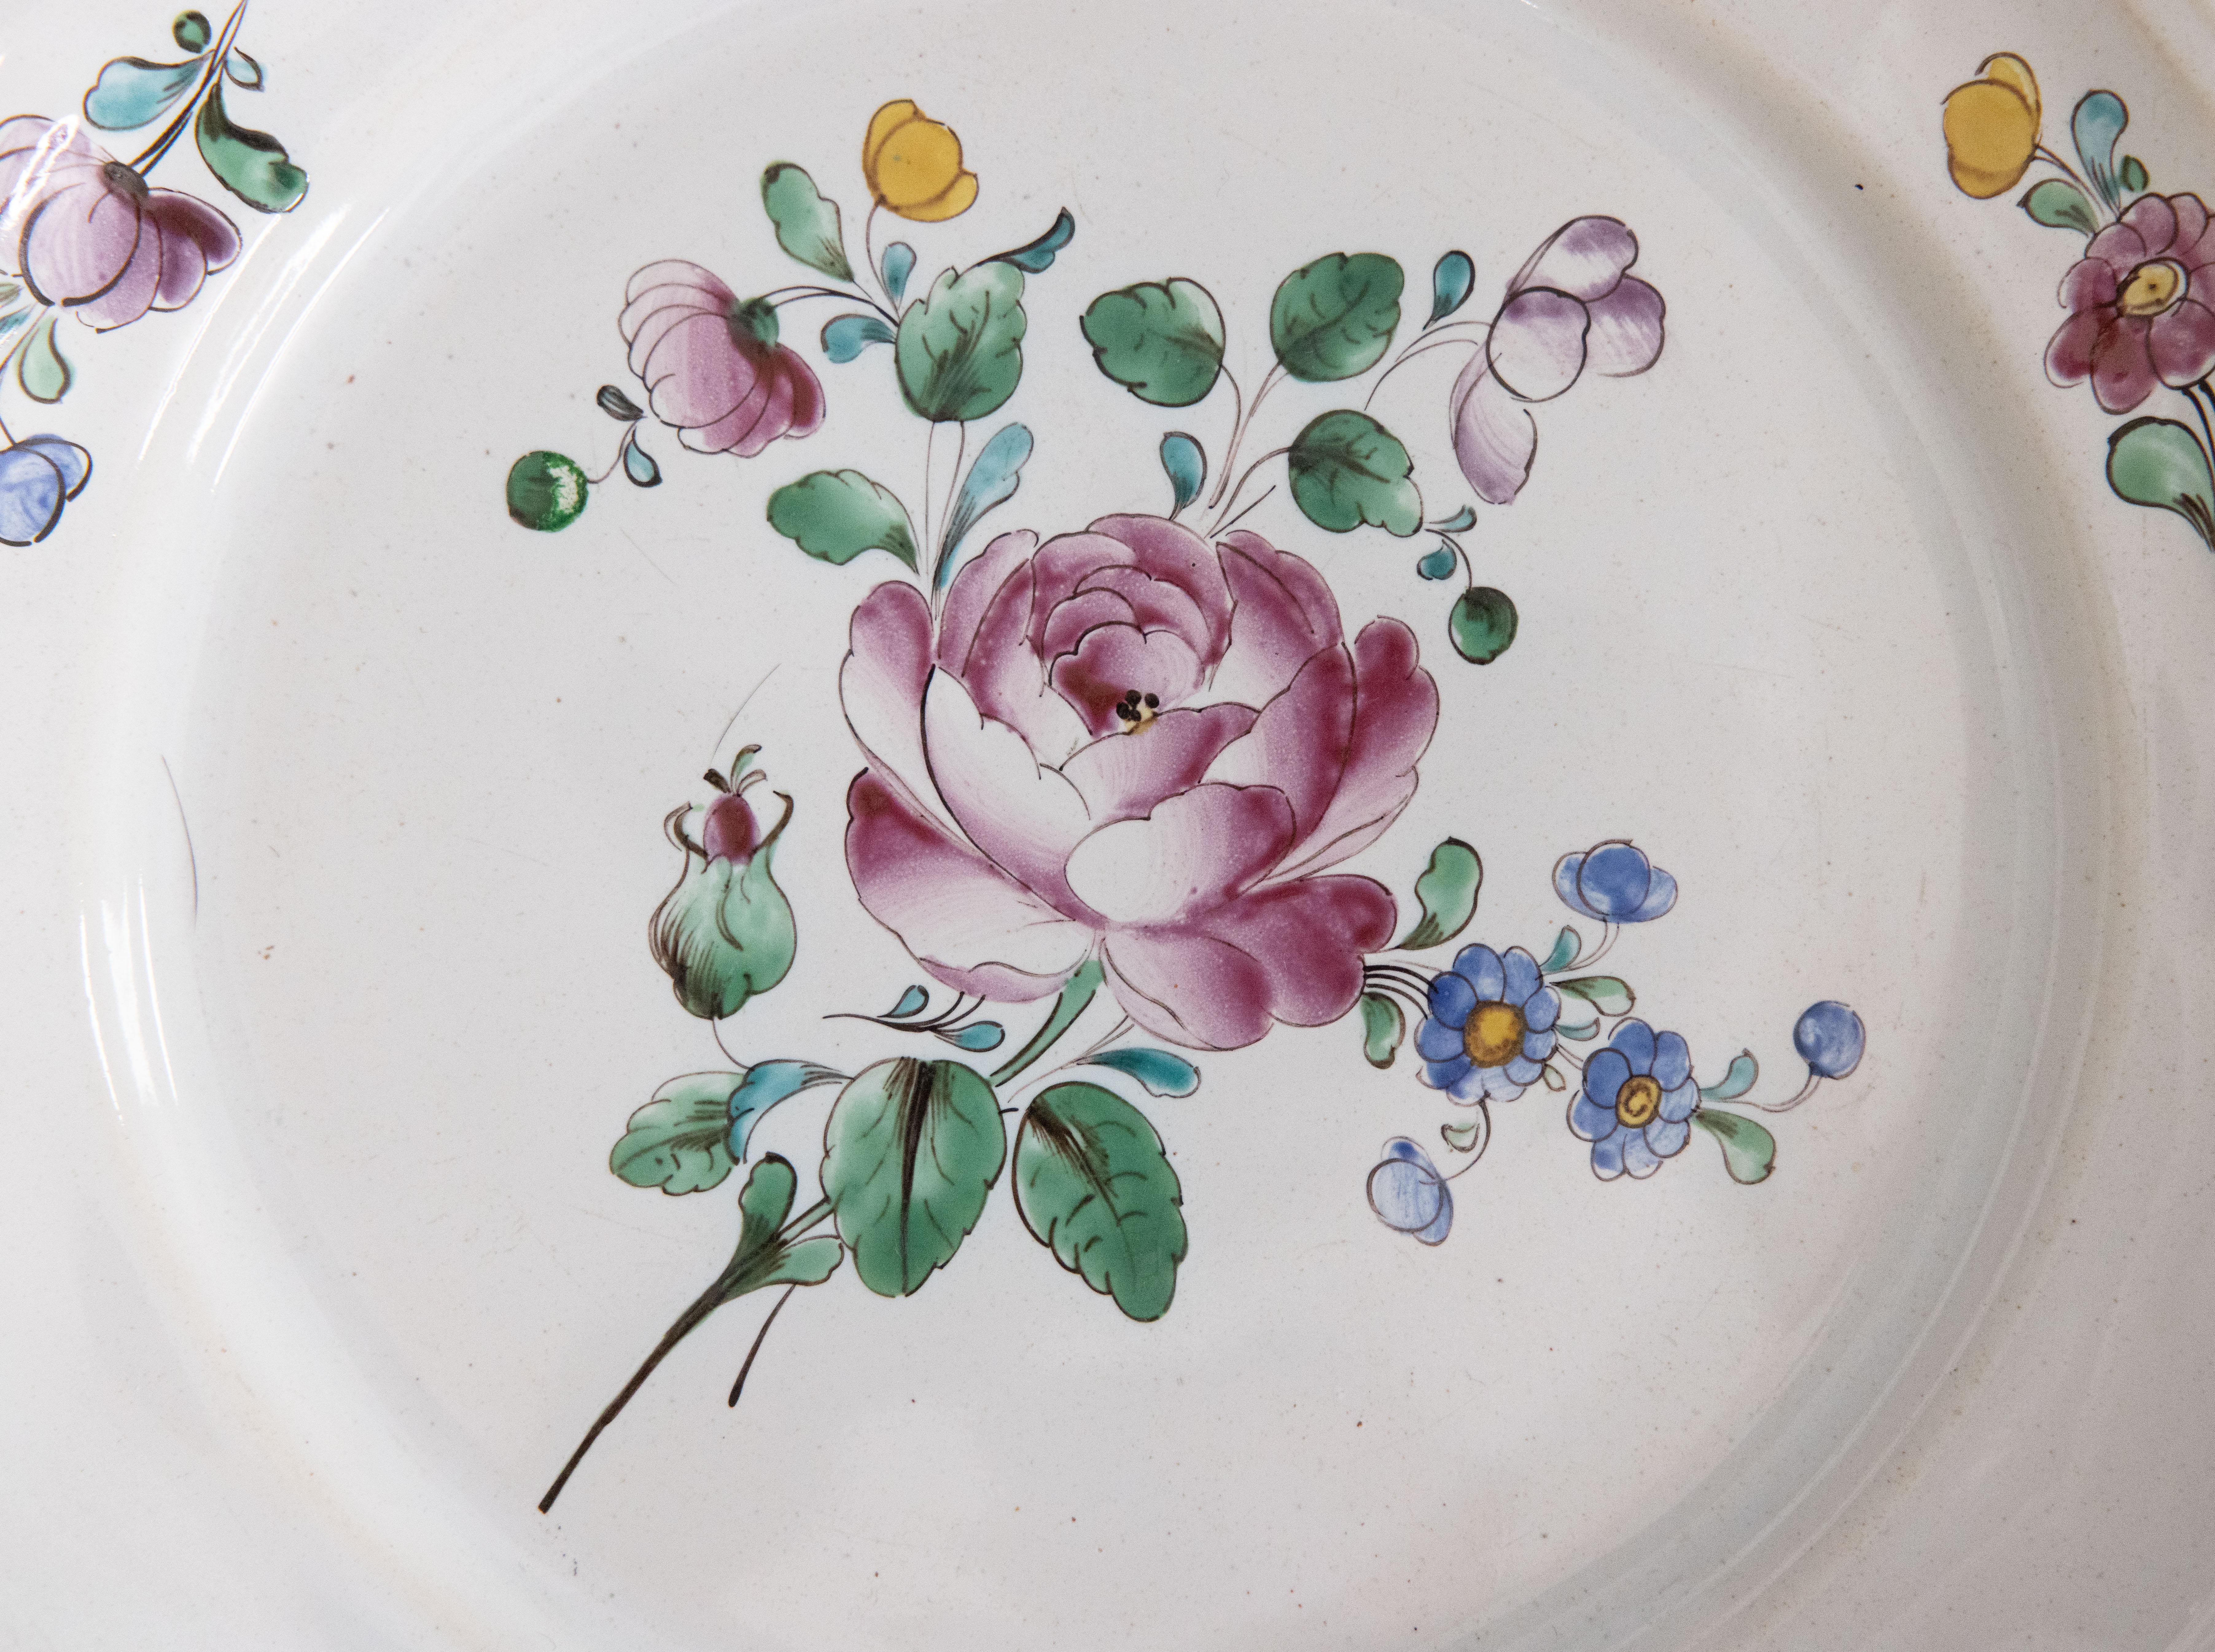 A lovely antique late 18th-century to early 19th-century French faience plate with beautiful hand painted flowers and a scalloped rim. It would look fabulous displayed on a wall or shelf in any room.

Dimensions
9.5